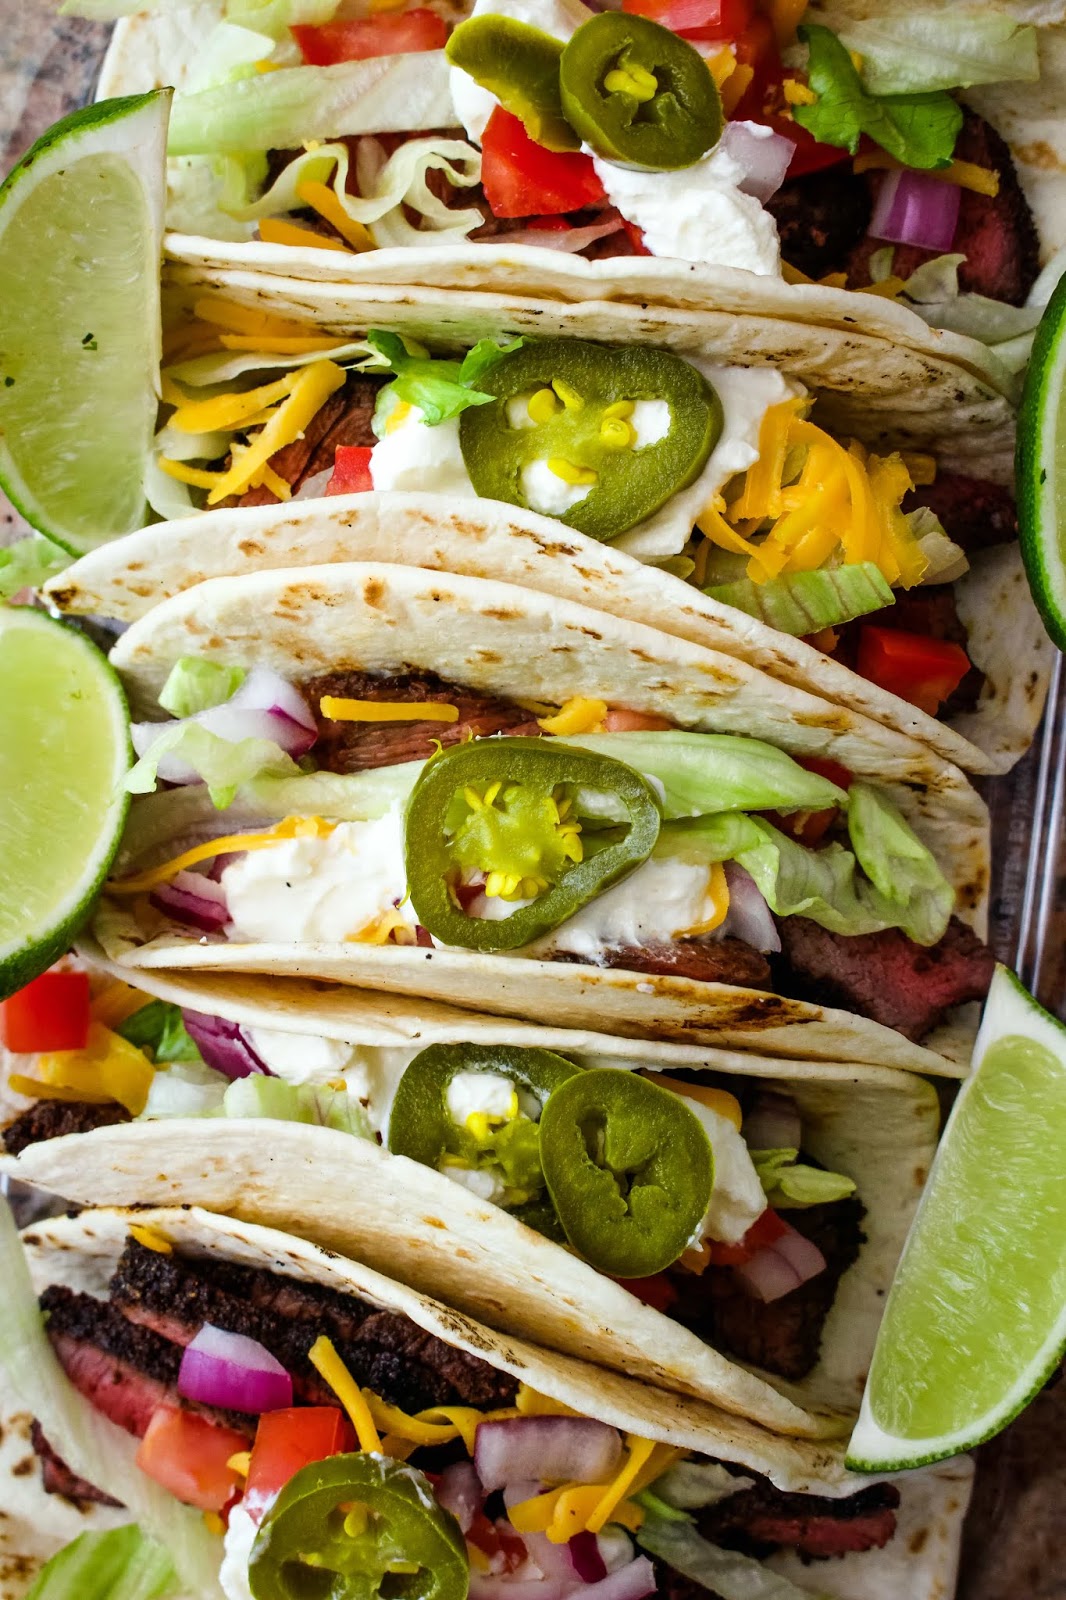 Grilled Sirloin Steak Tacos feature dry-rubbed grilled sirloin steak topped with all of your favorite taco toppings. You will want to make them all summer long! #tacos #steaktacos #grillingrecipe